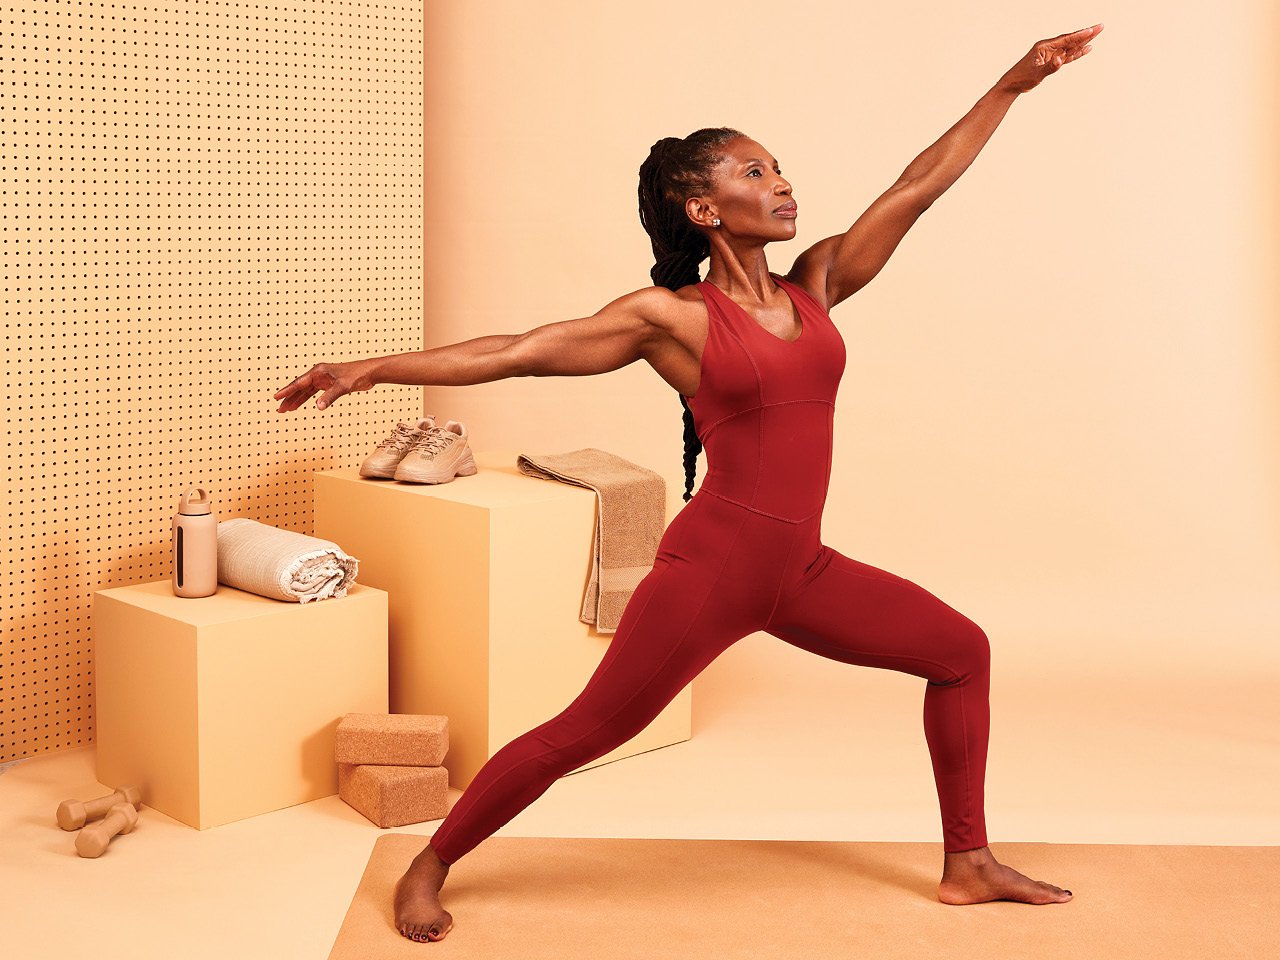 A woman doing yoga while wearing a red one-piece bodysuit against a sand-coloured background.